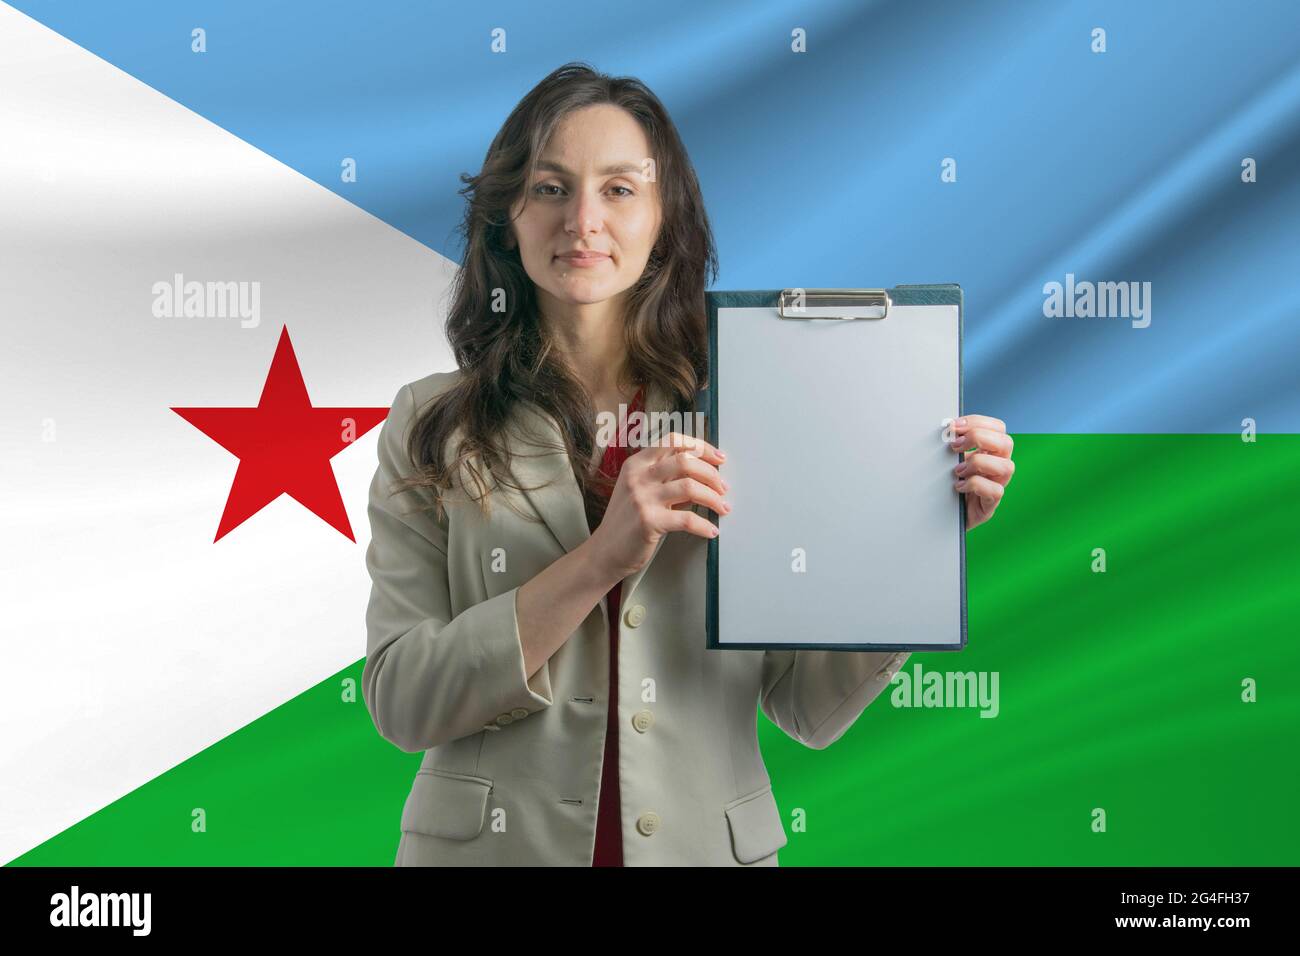 Study in Djibouti. Beautiful woman holding a sheet of paper in her hands. Girl on the background of the flag of Djibouti. Stock Photo